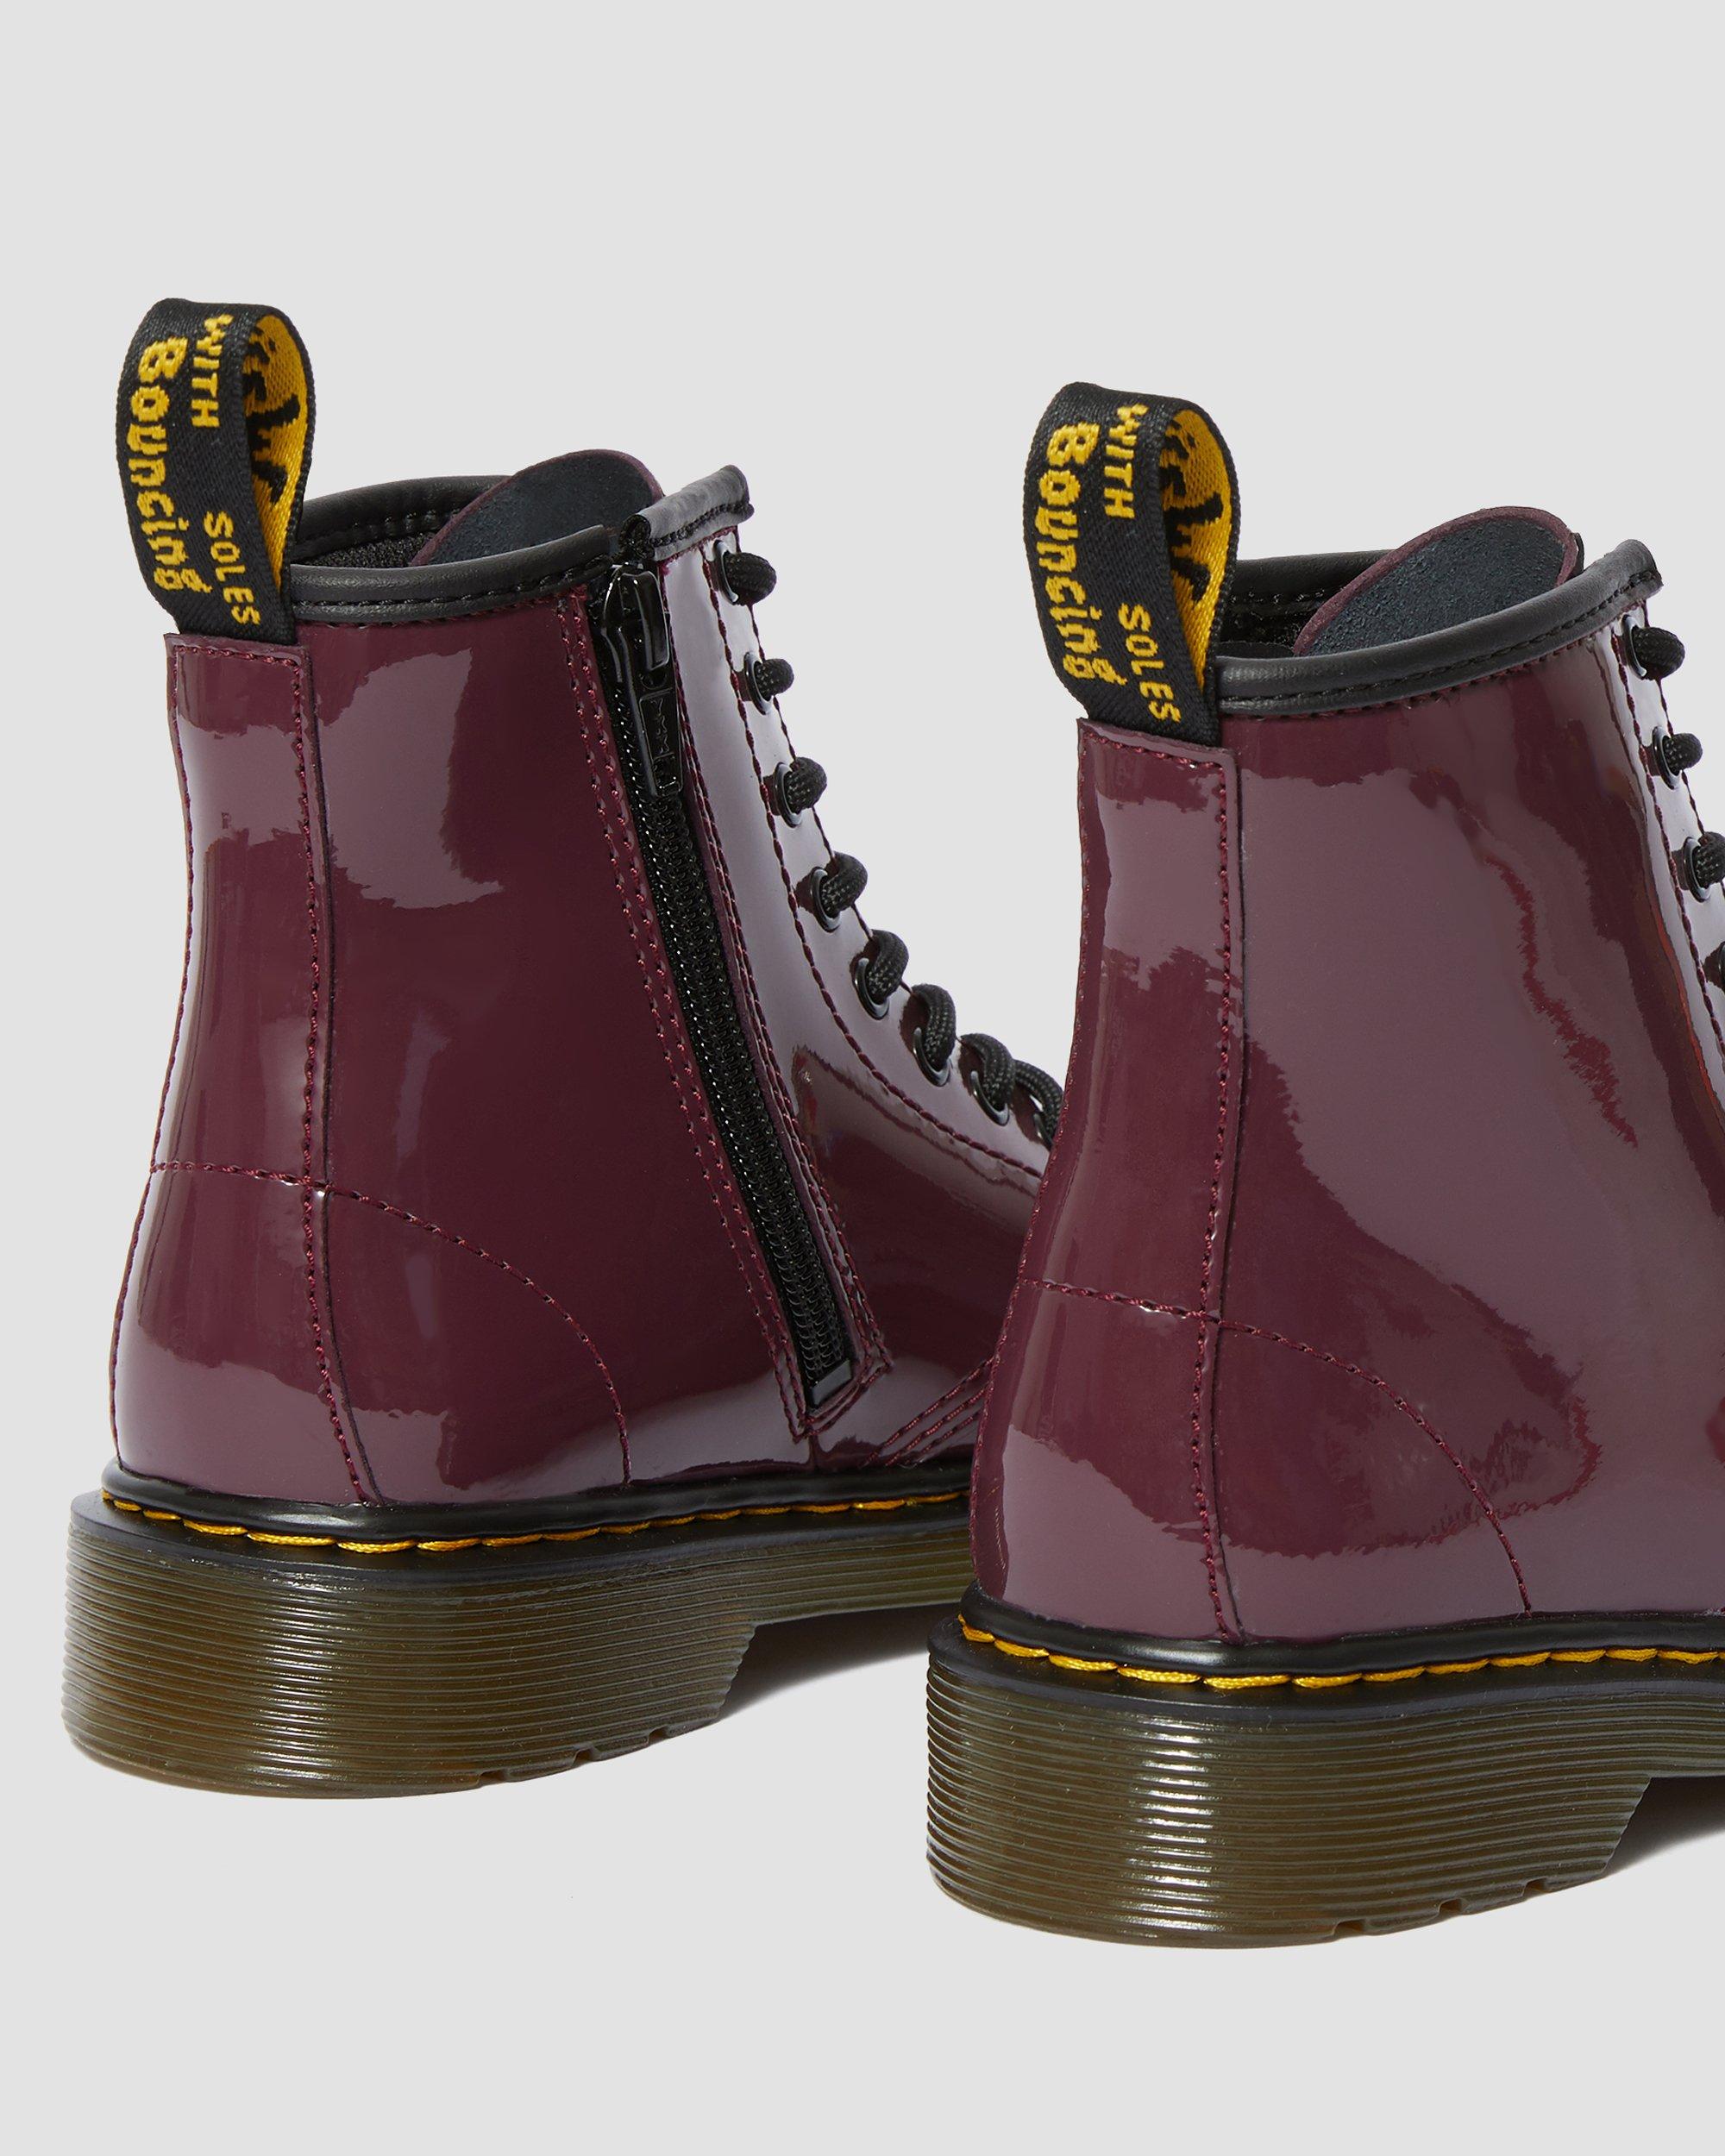 Junior 1460 Patent Leather Lace Up Boots in Plum | Dr. Martens